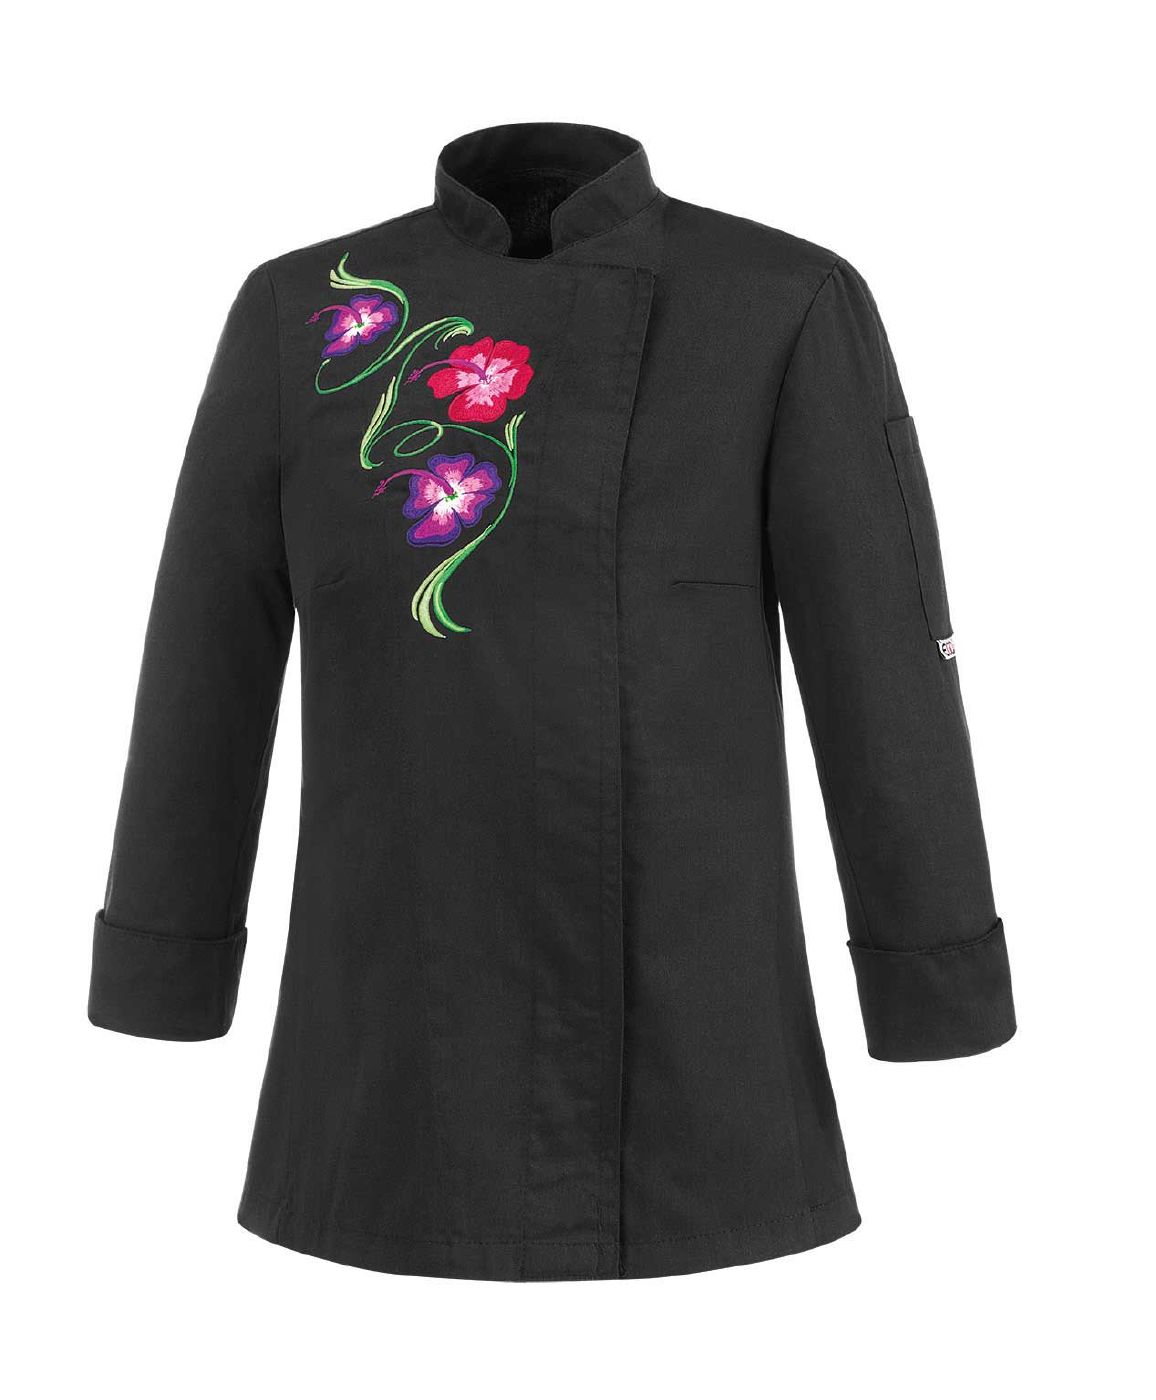 FLOWERS ROSE SLIM FIT Woman chef jacket with press buttons and floral embroidery EGO CHEF